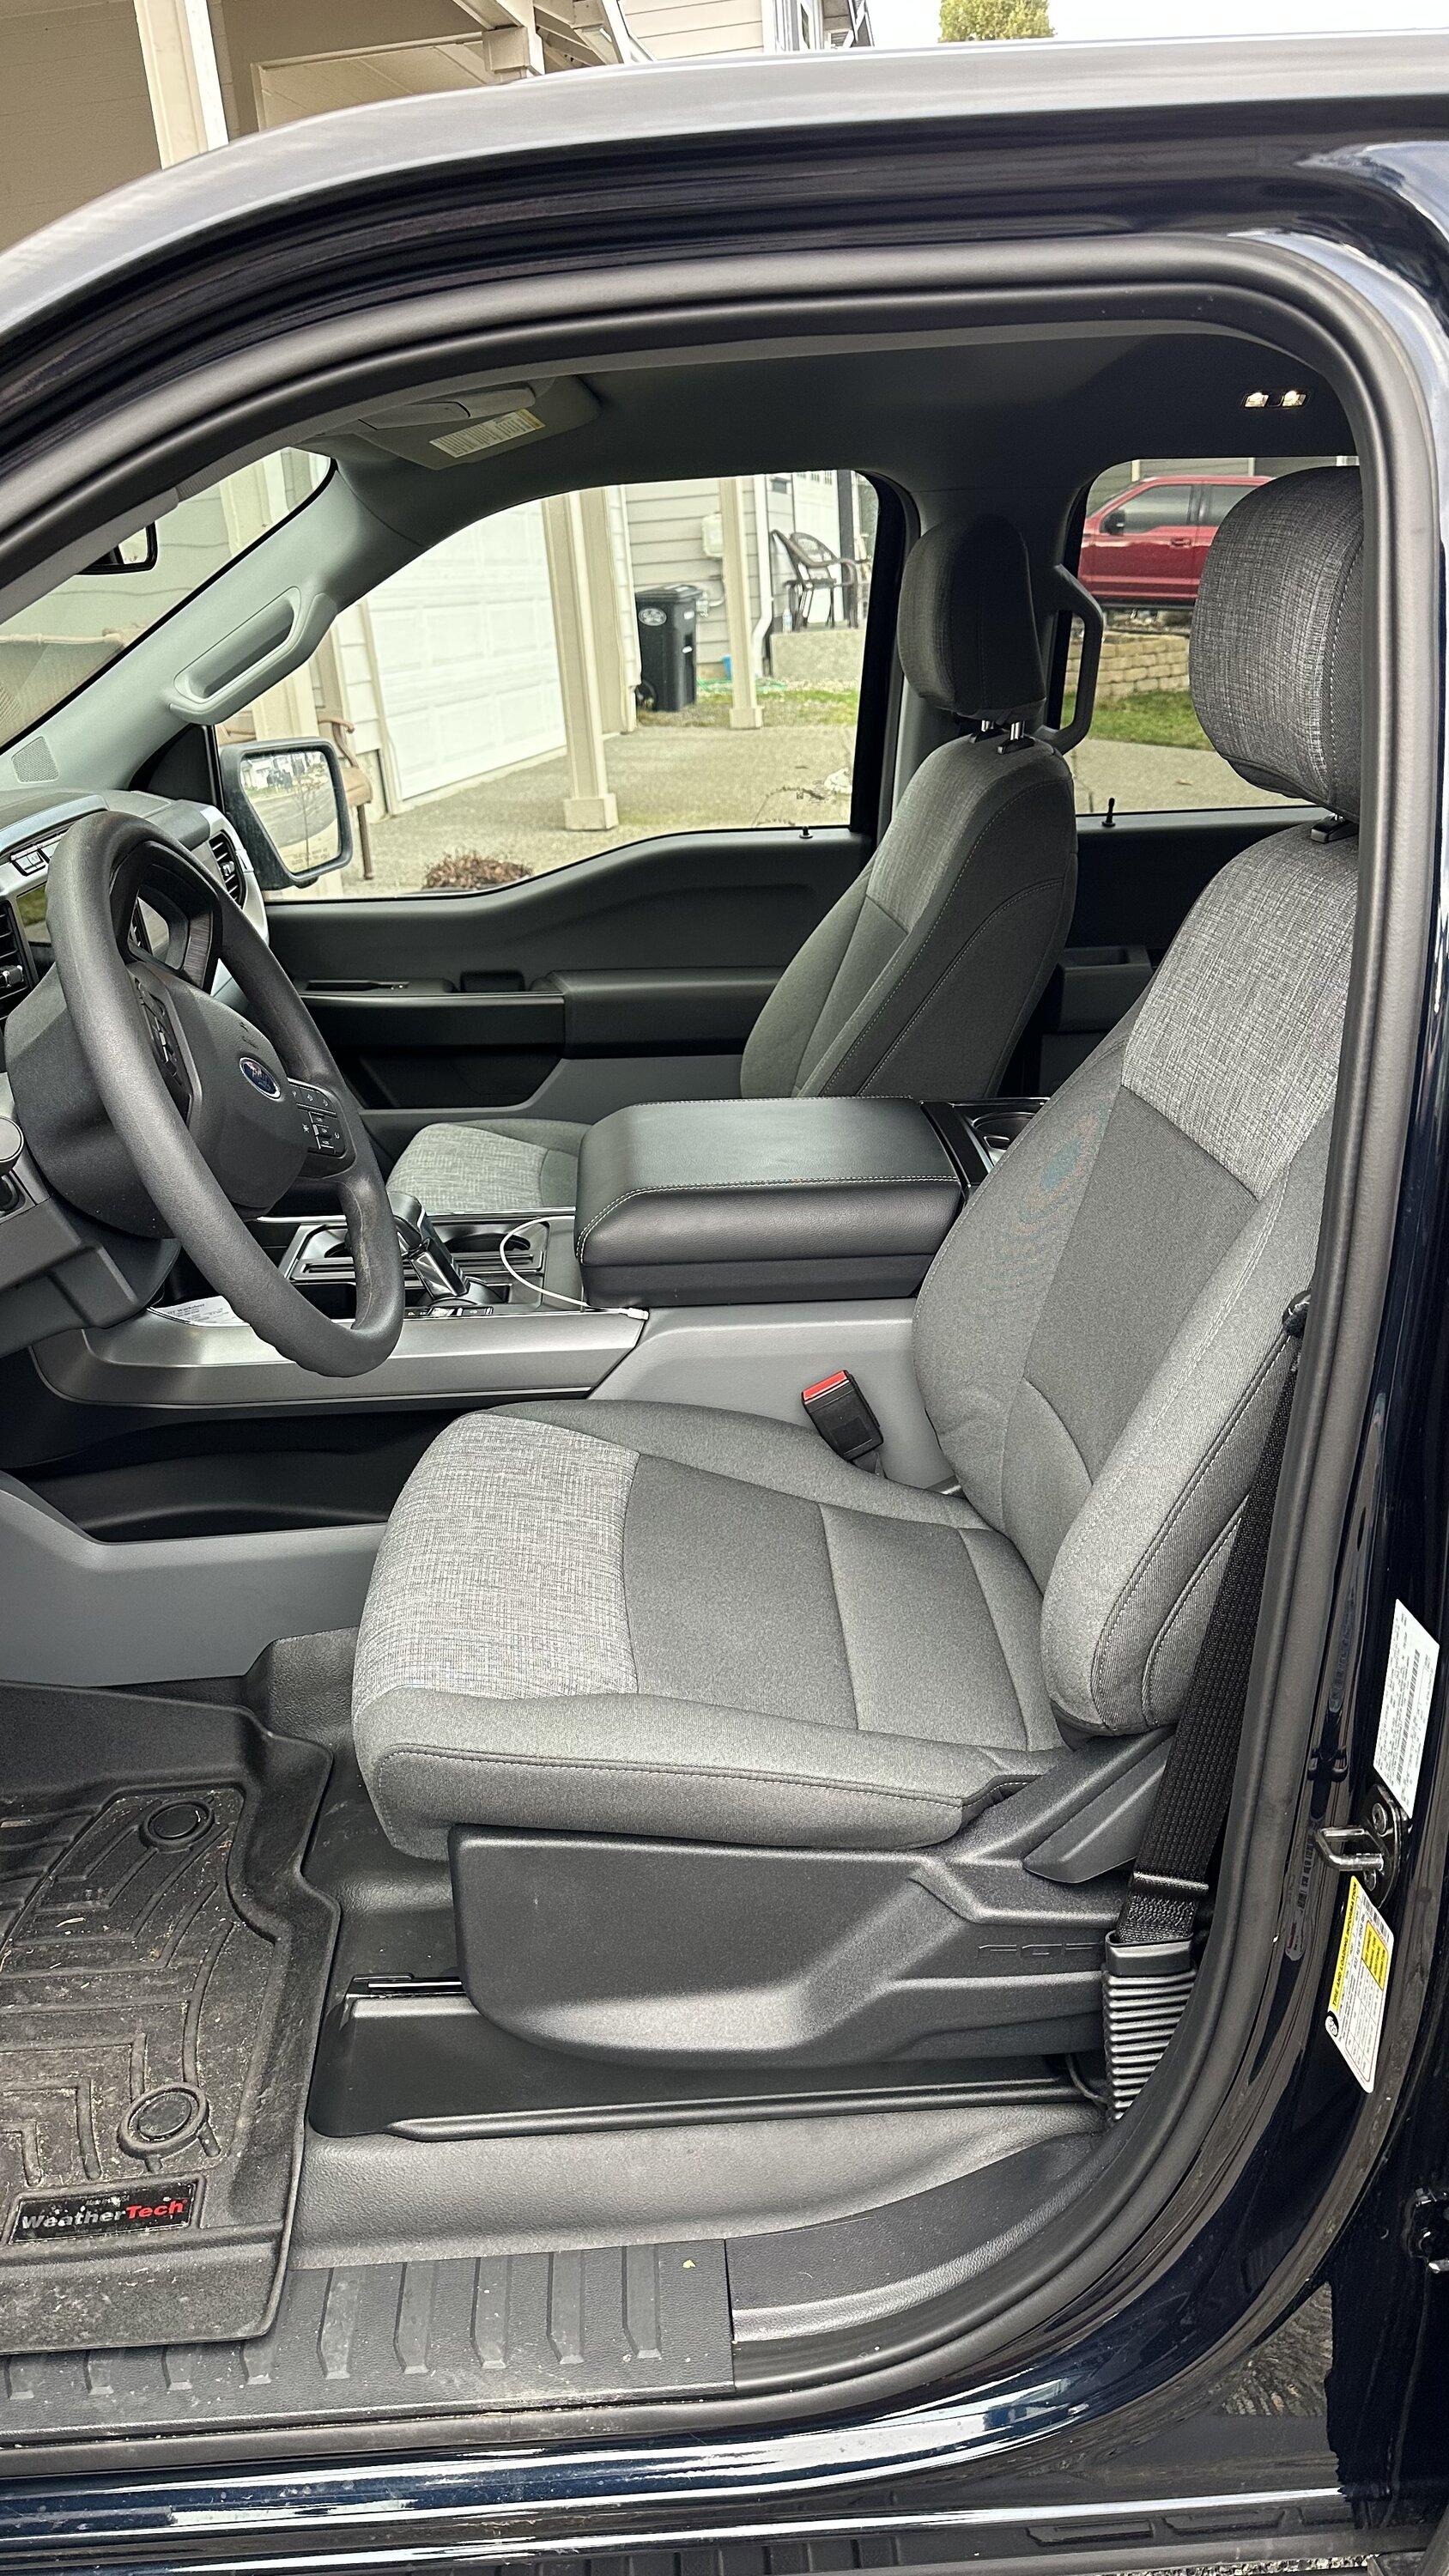 Ford F-150 Lightning Changed Pro Seats to XLT Seats by changing OEM seat covers IMG-5724